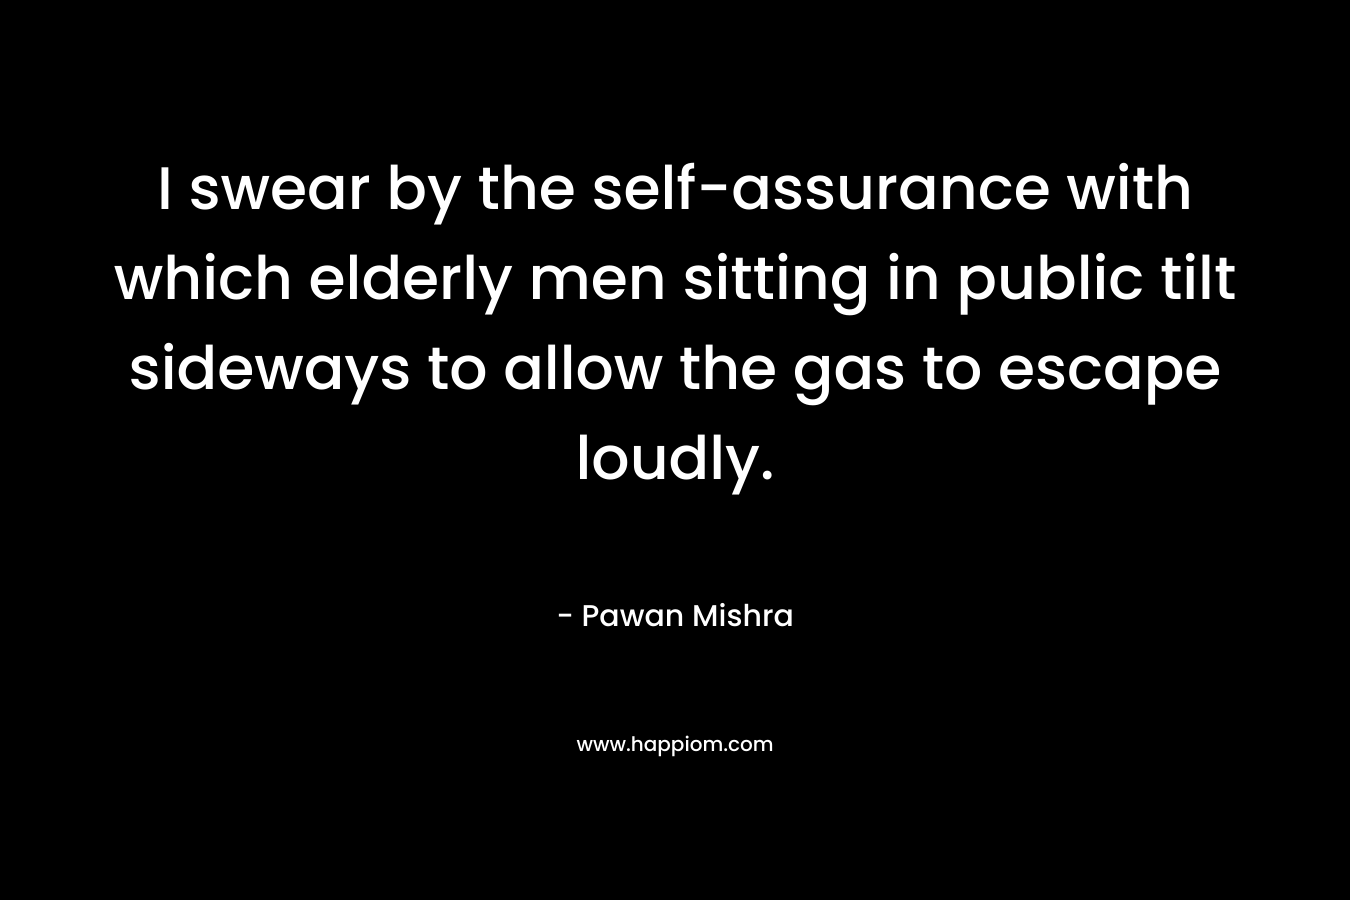 I swear by the self-assurance with which elderly men sitting in public tilt sideways to allow the gas to escape loudly. – Pawan Mishra